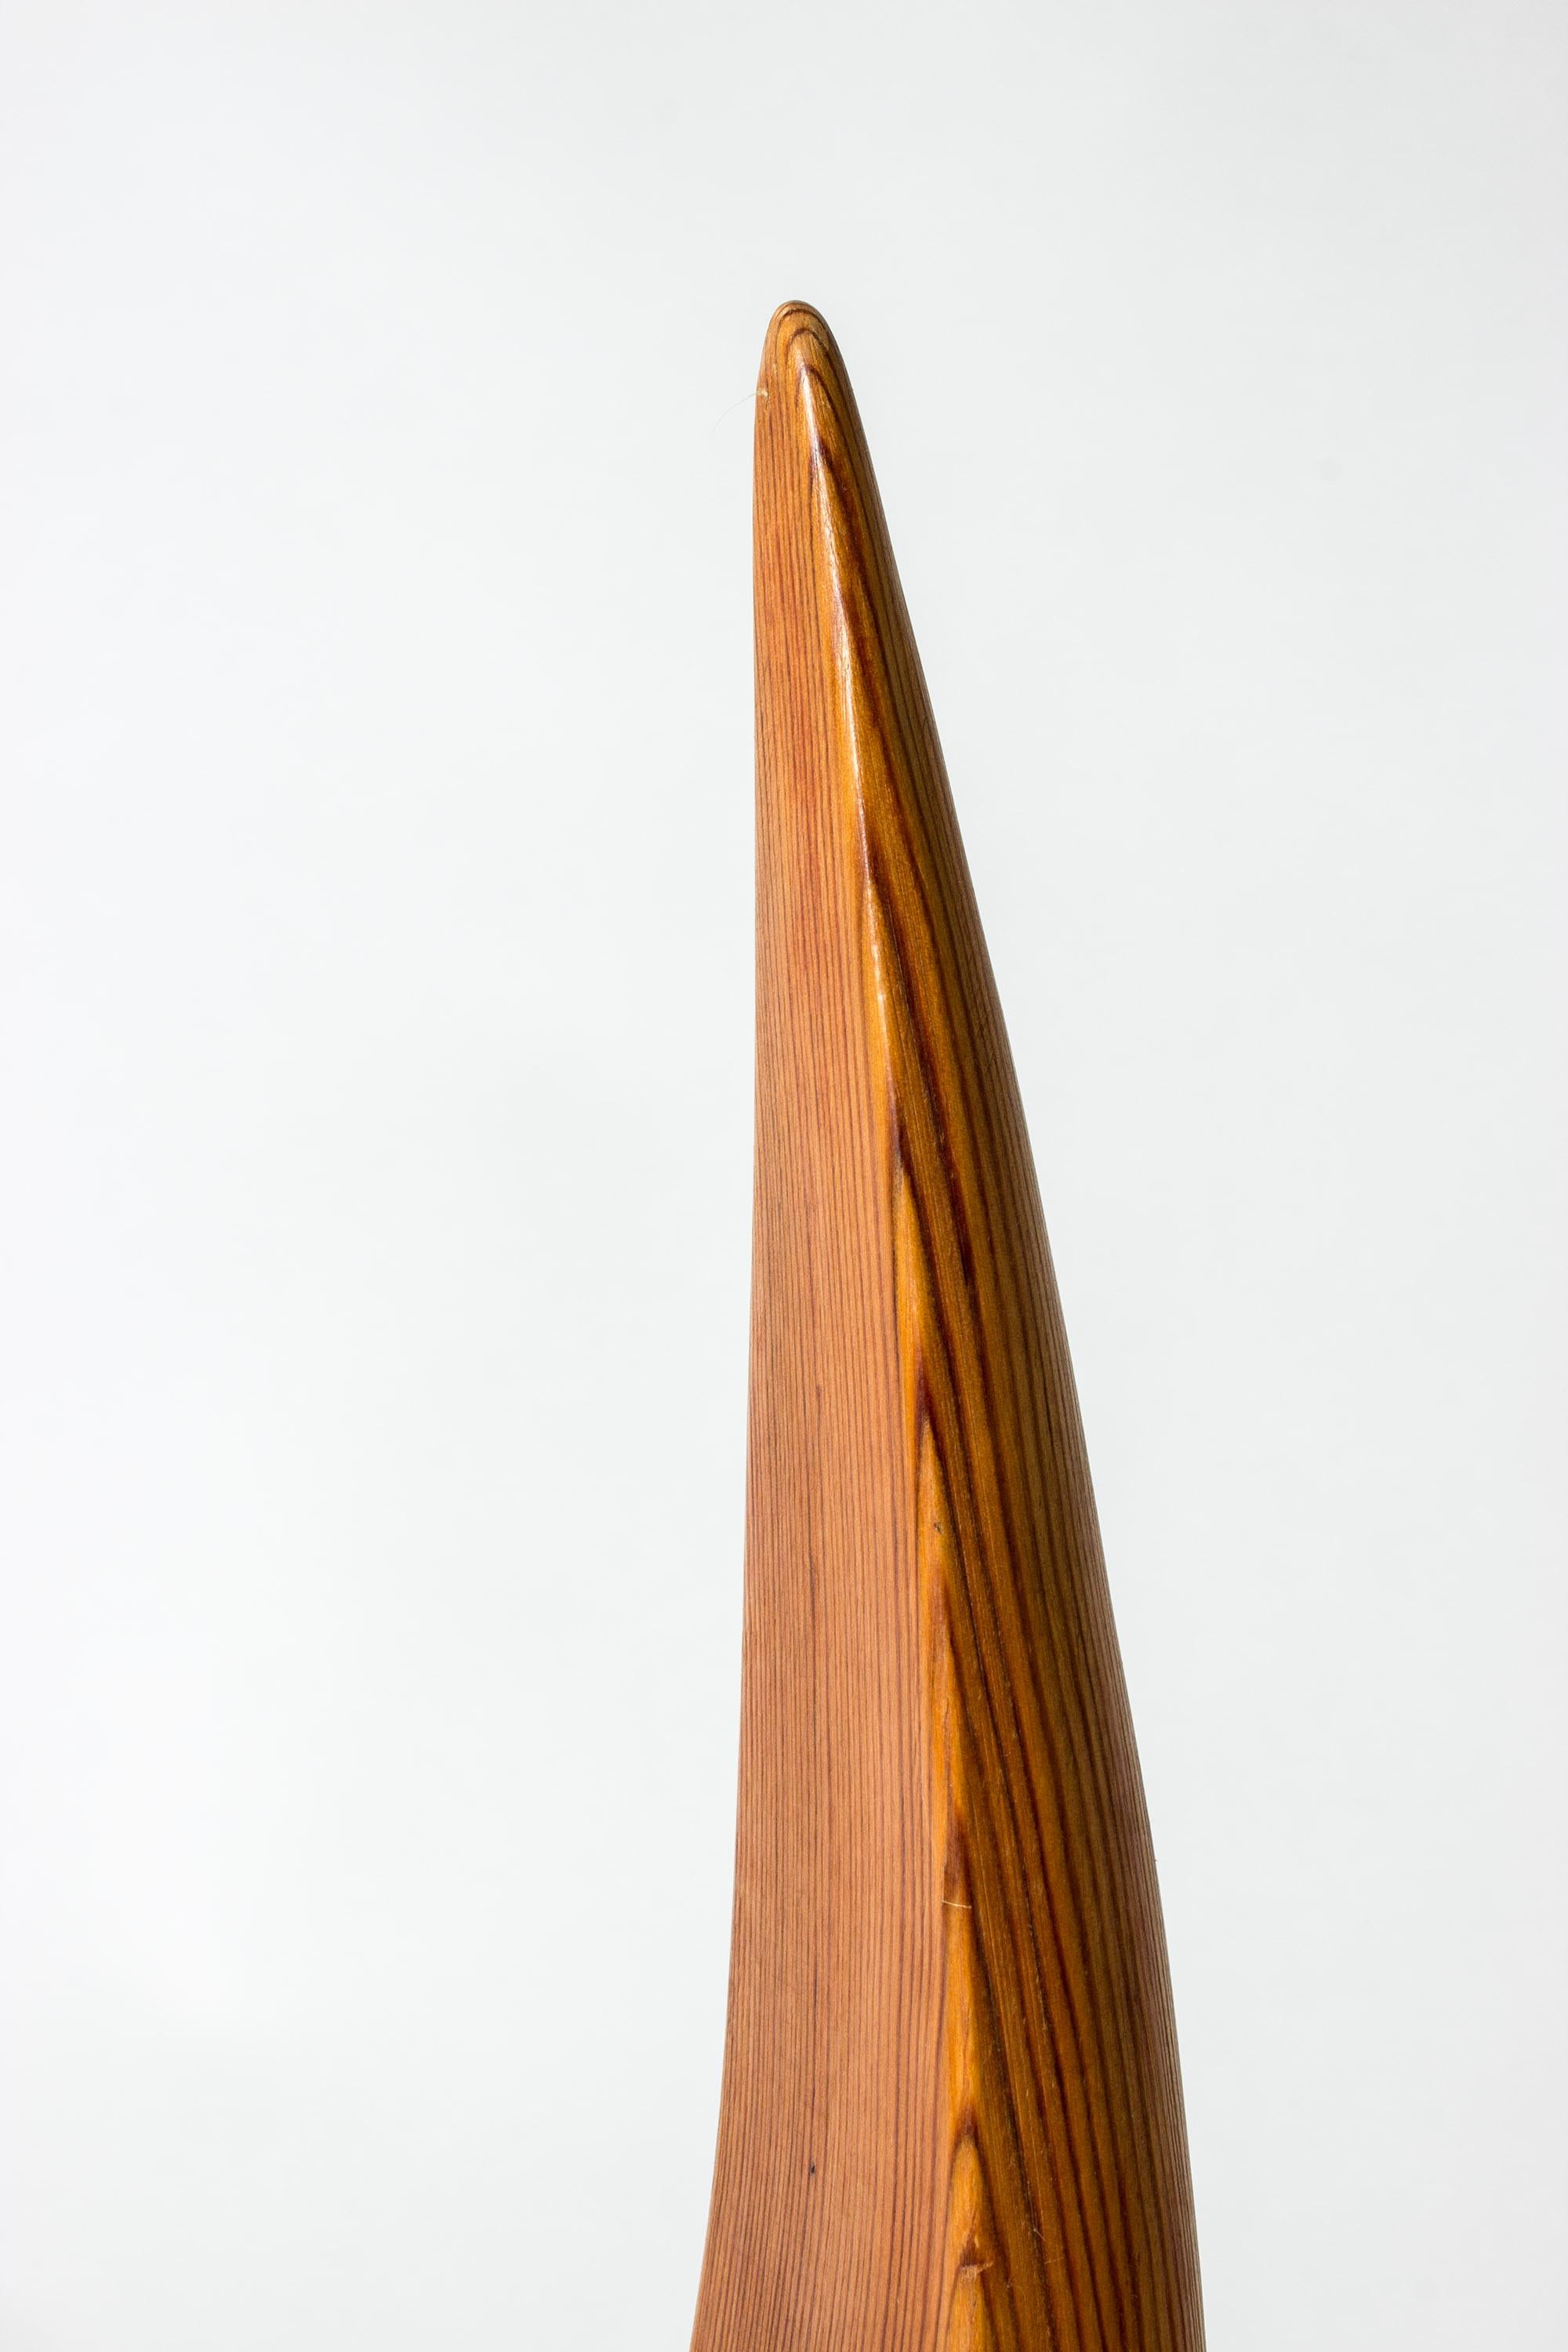 Mid-20th Century Midcentury Wooden Abstract Sculpture by Johnny Mattsson, Sweden, 1962 For Sale